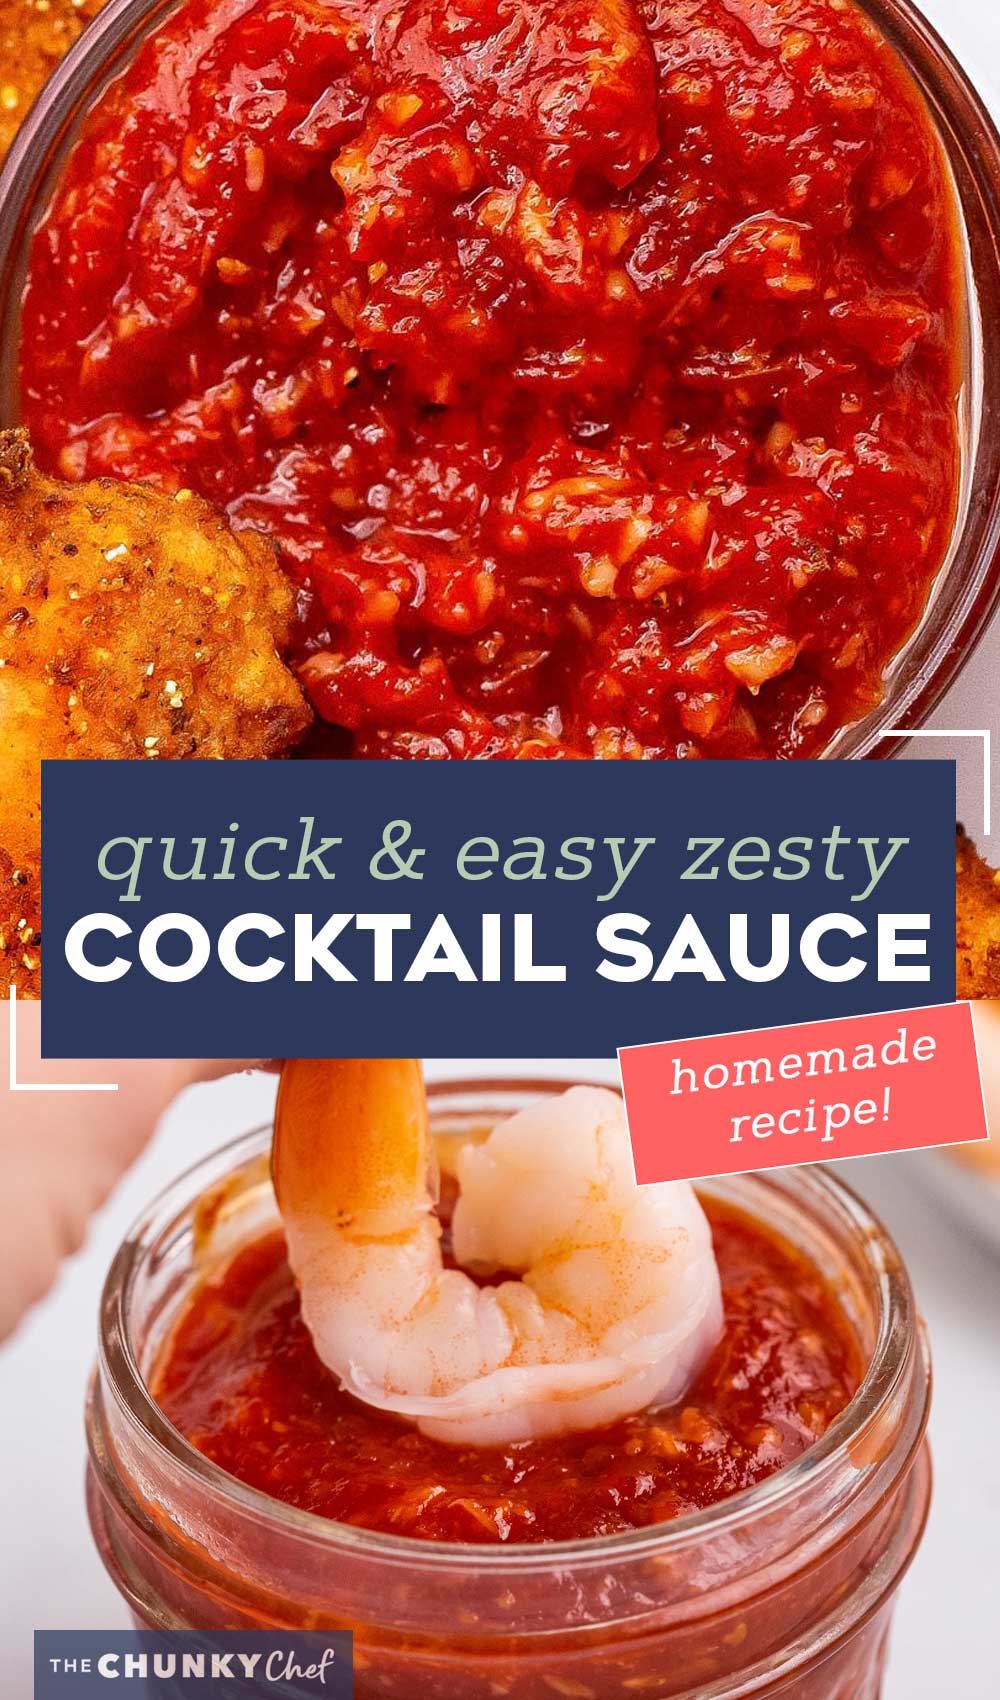 Homemade Cocktail Sauce - The Chunky Chef